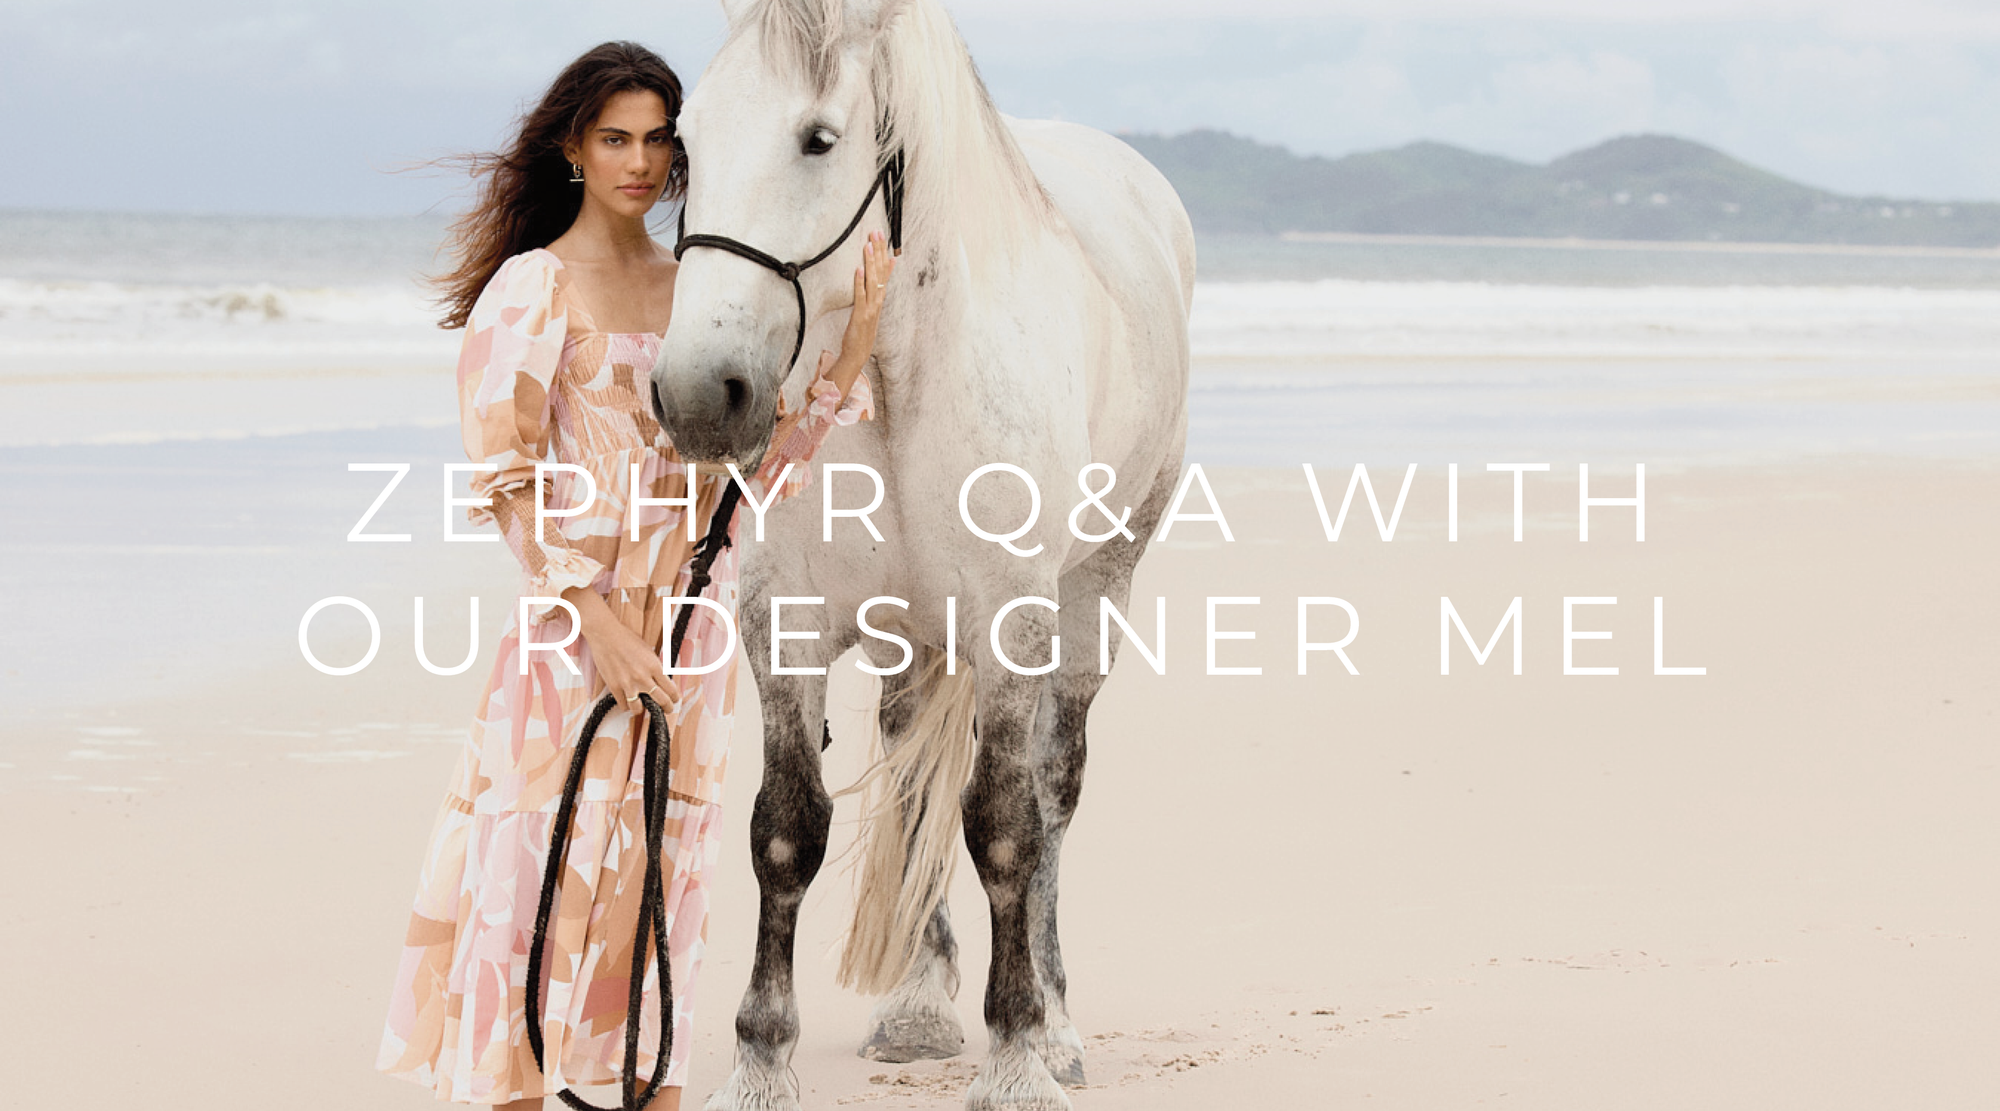 Our Designer Mel Answers Questions About Zephyr